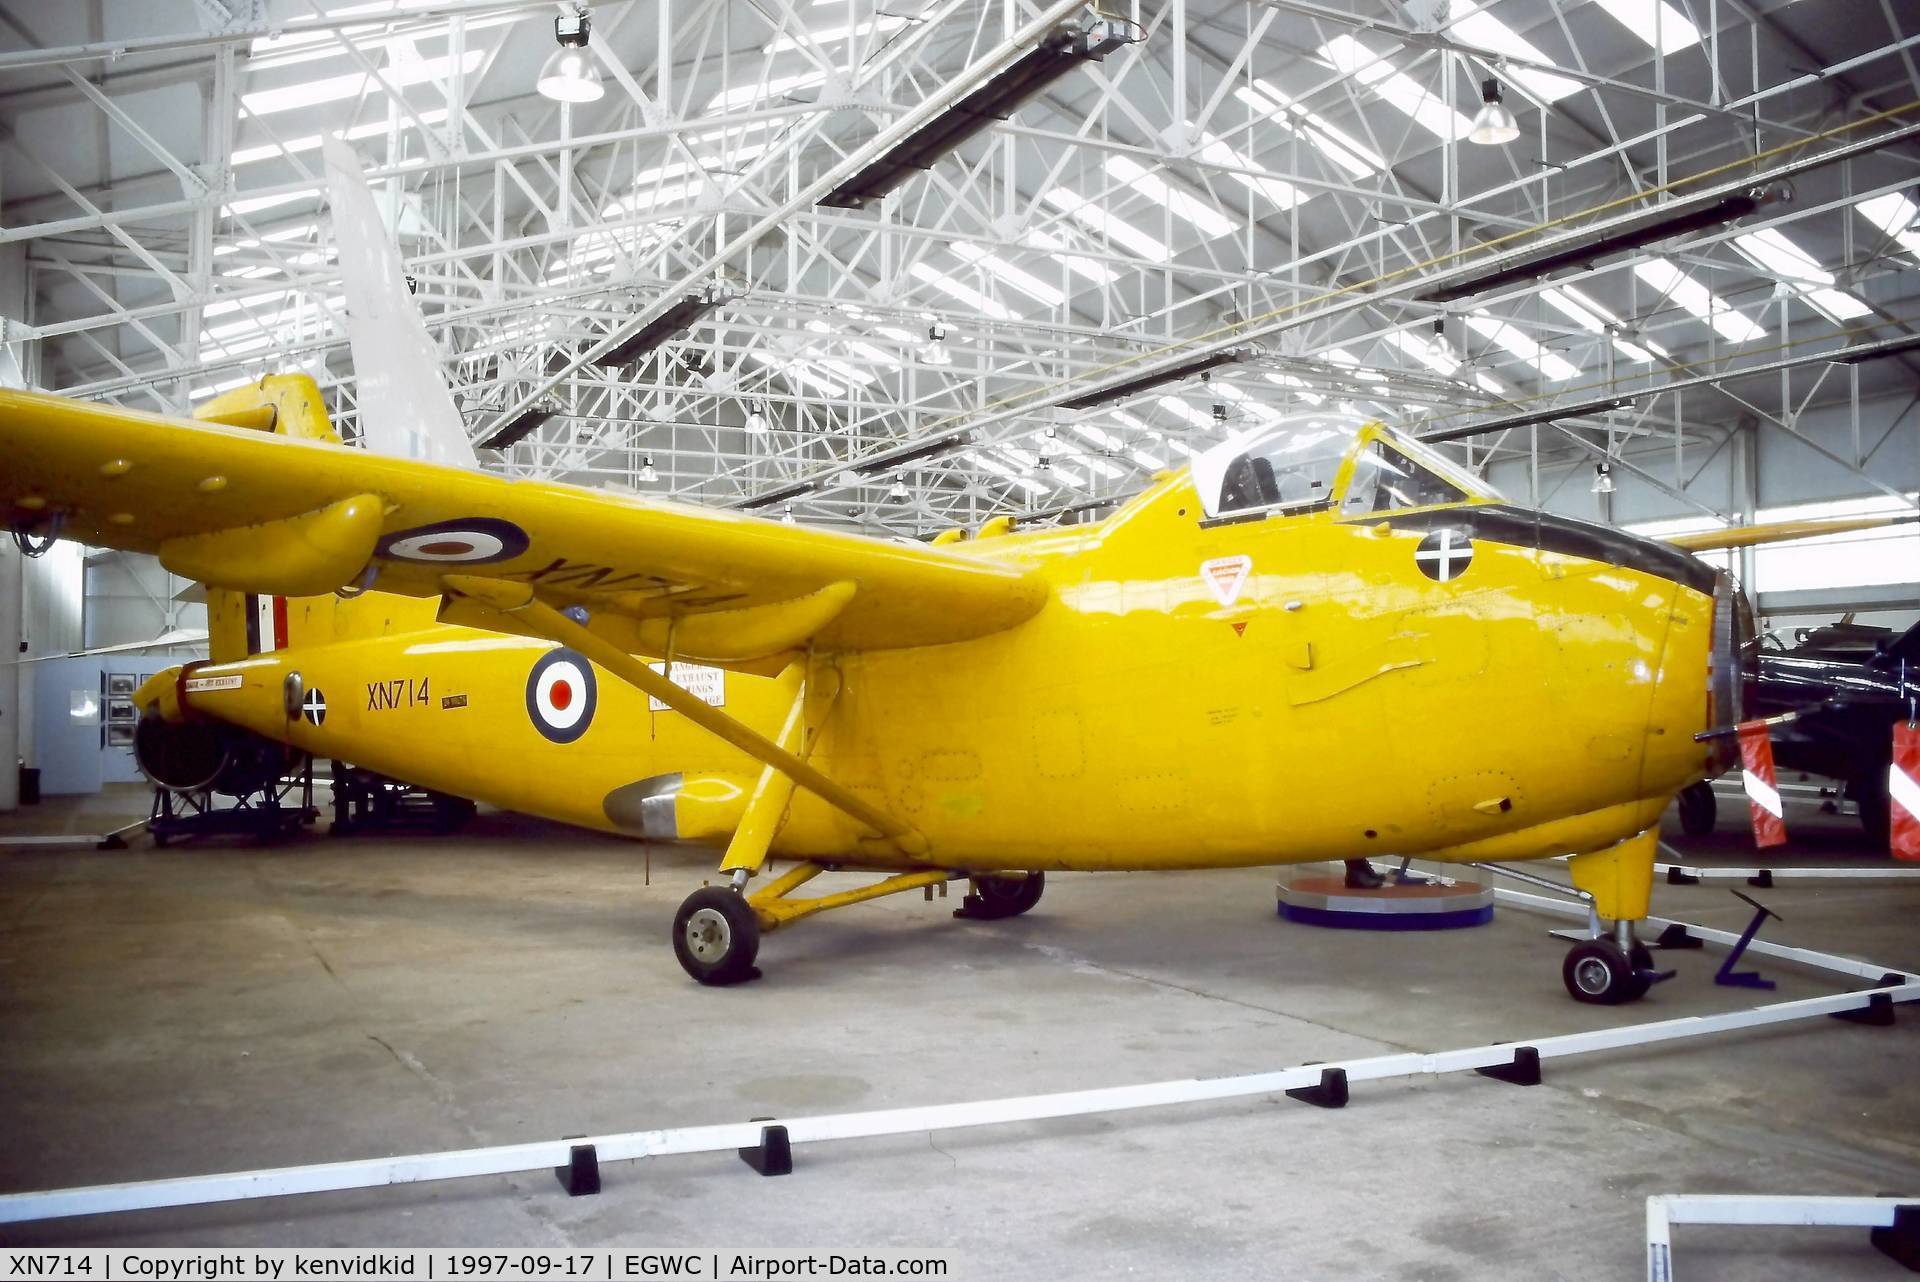 XN714, 1963 Hunting H.126 C/N H1-1, A visit to Cosford in 1997.